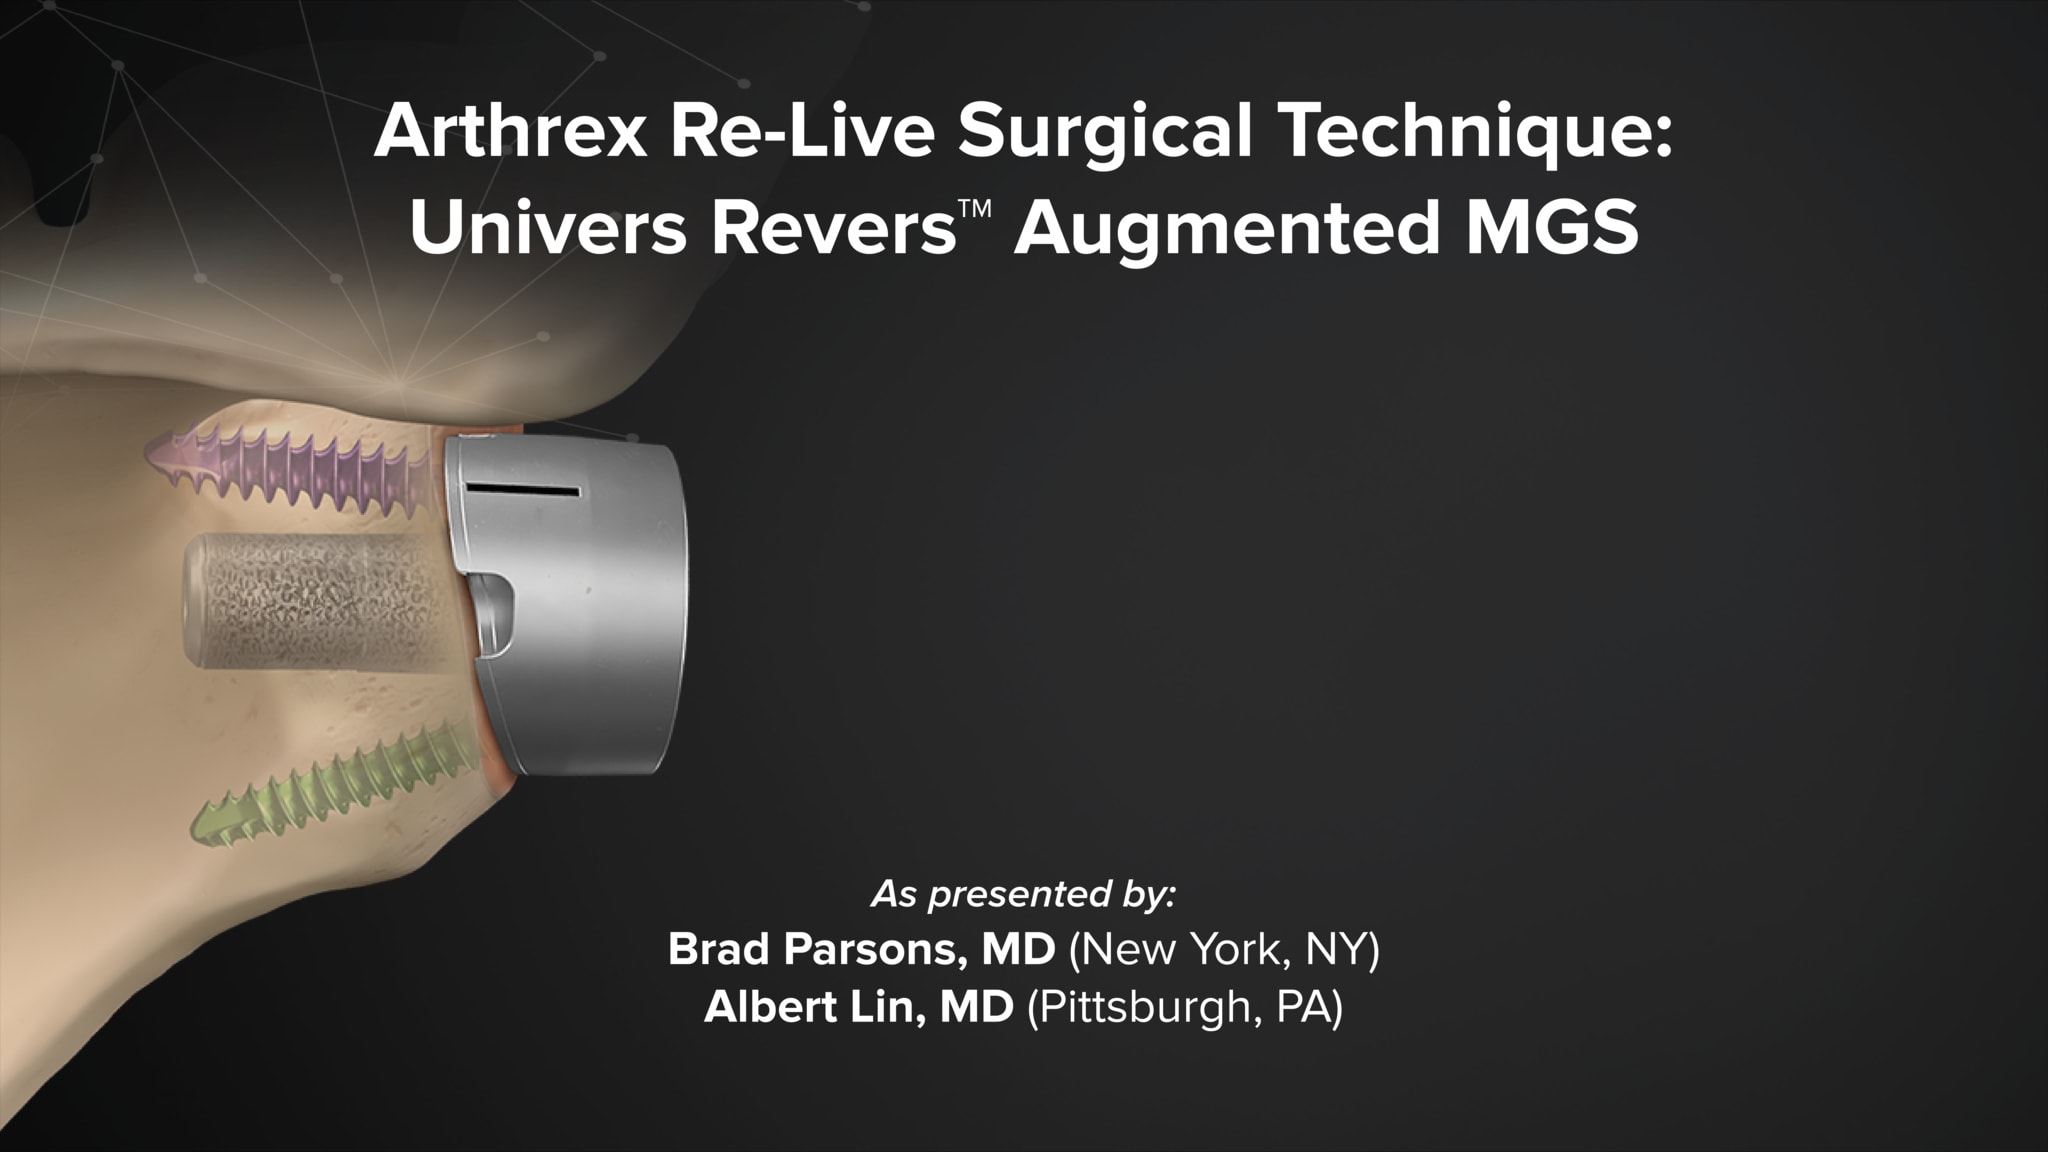 Arthrex Re-Live Surgical Technique: Univers Revers™ Augmented Modular Glenoid System